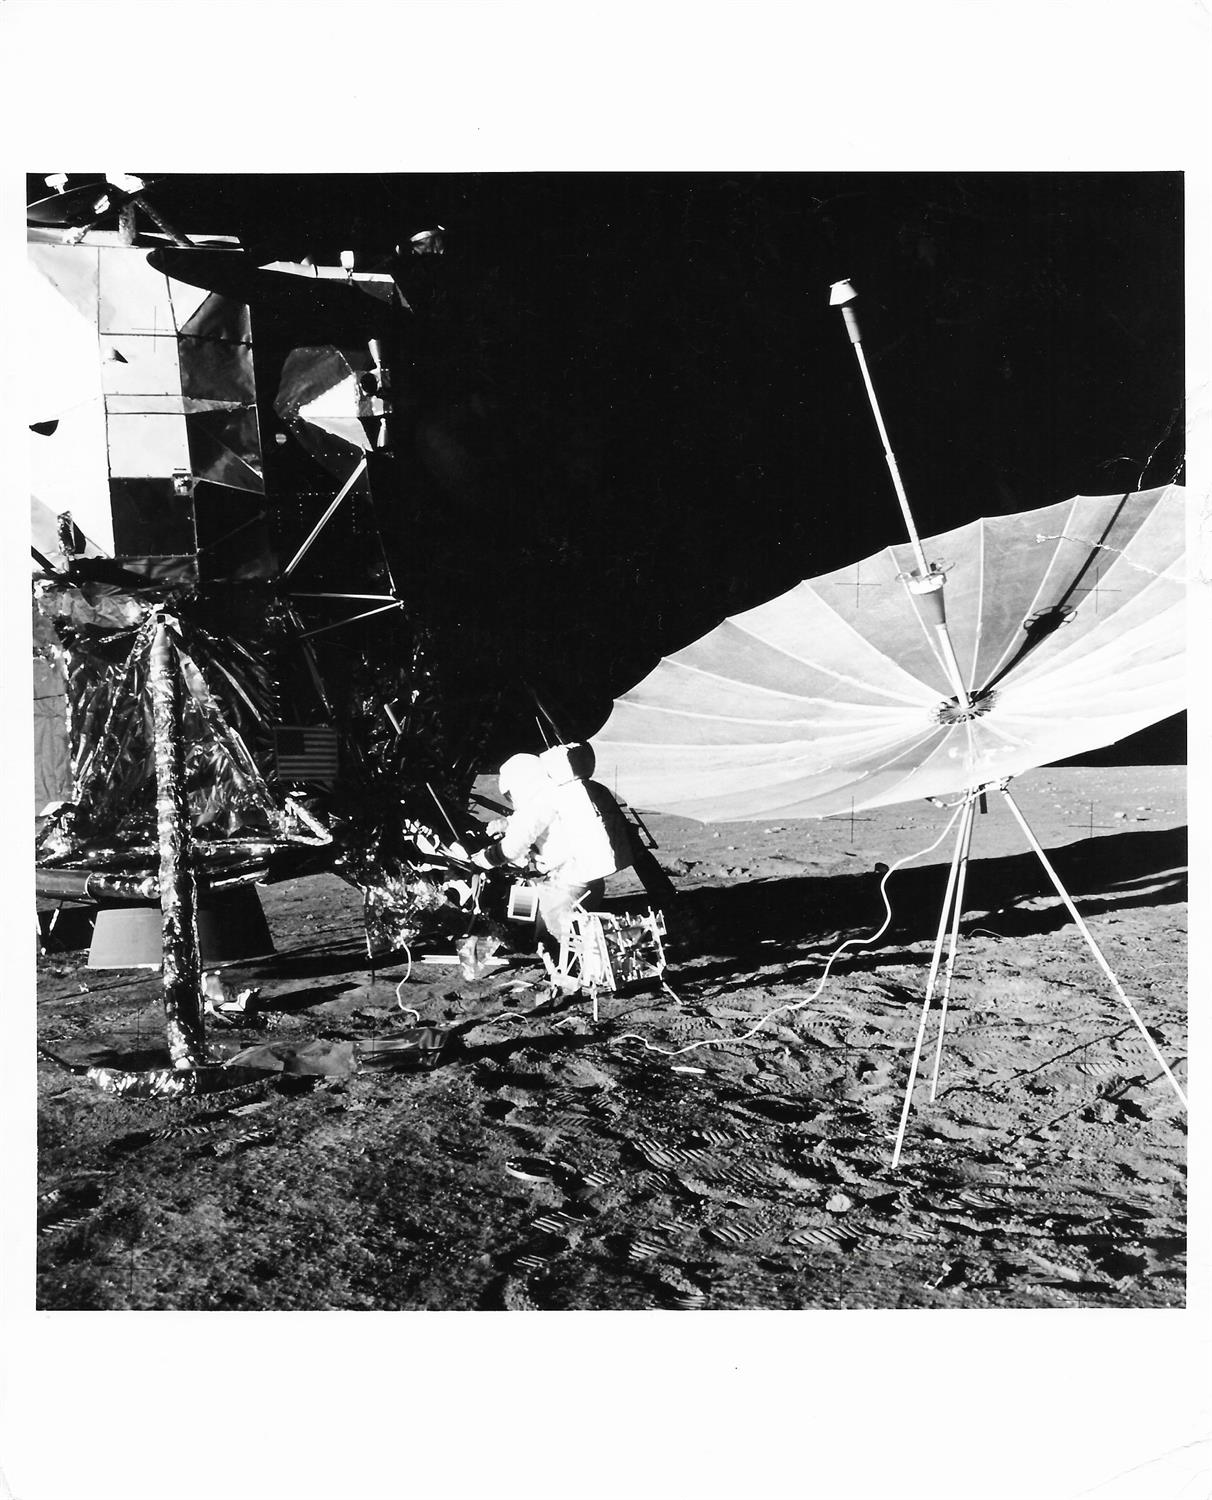 Deployment of scientific experiments on the lunar surface [three images], Apollo 12, November 1969 - Image 3 of 7